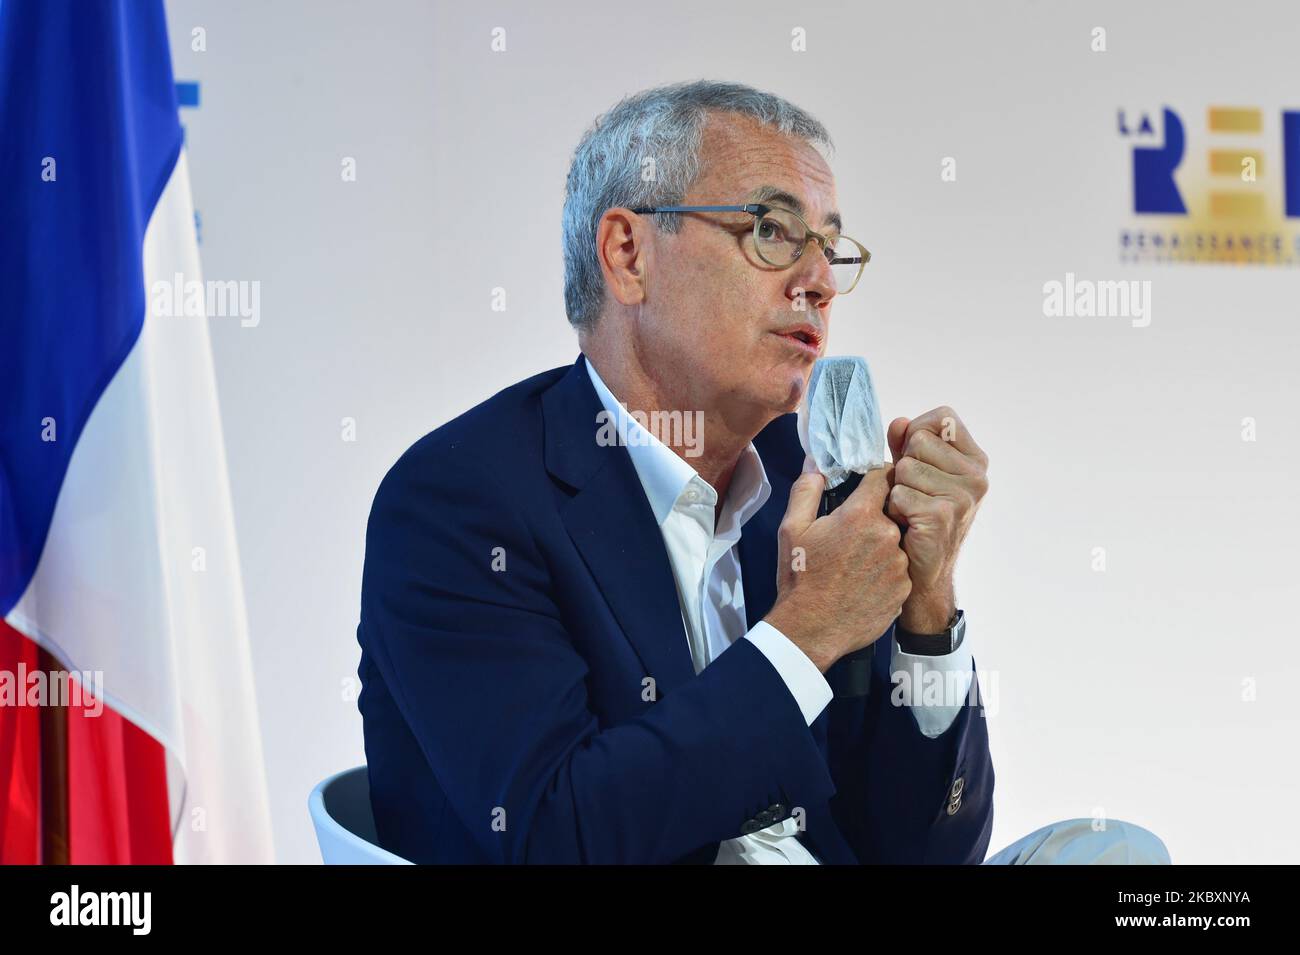 French energy company Engie's chairman of the board Jean-Pierre Clamadieu attends at the meeting of French employers' association Medef themed 'The Renaissance of French Companies' on August 27, 2020, in Paris, France. (Photo by Daniel Pier/NurPhoto) Stock Photo